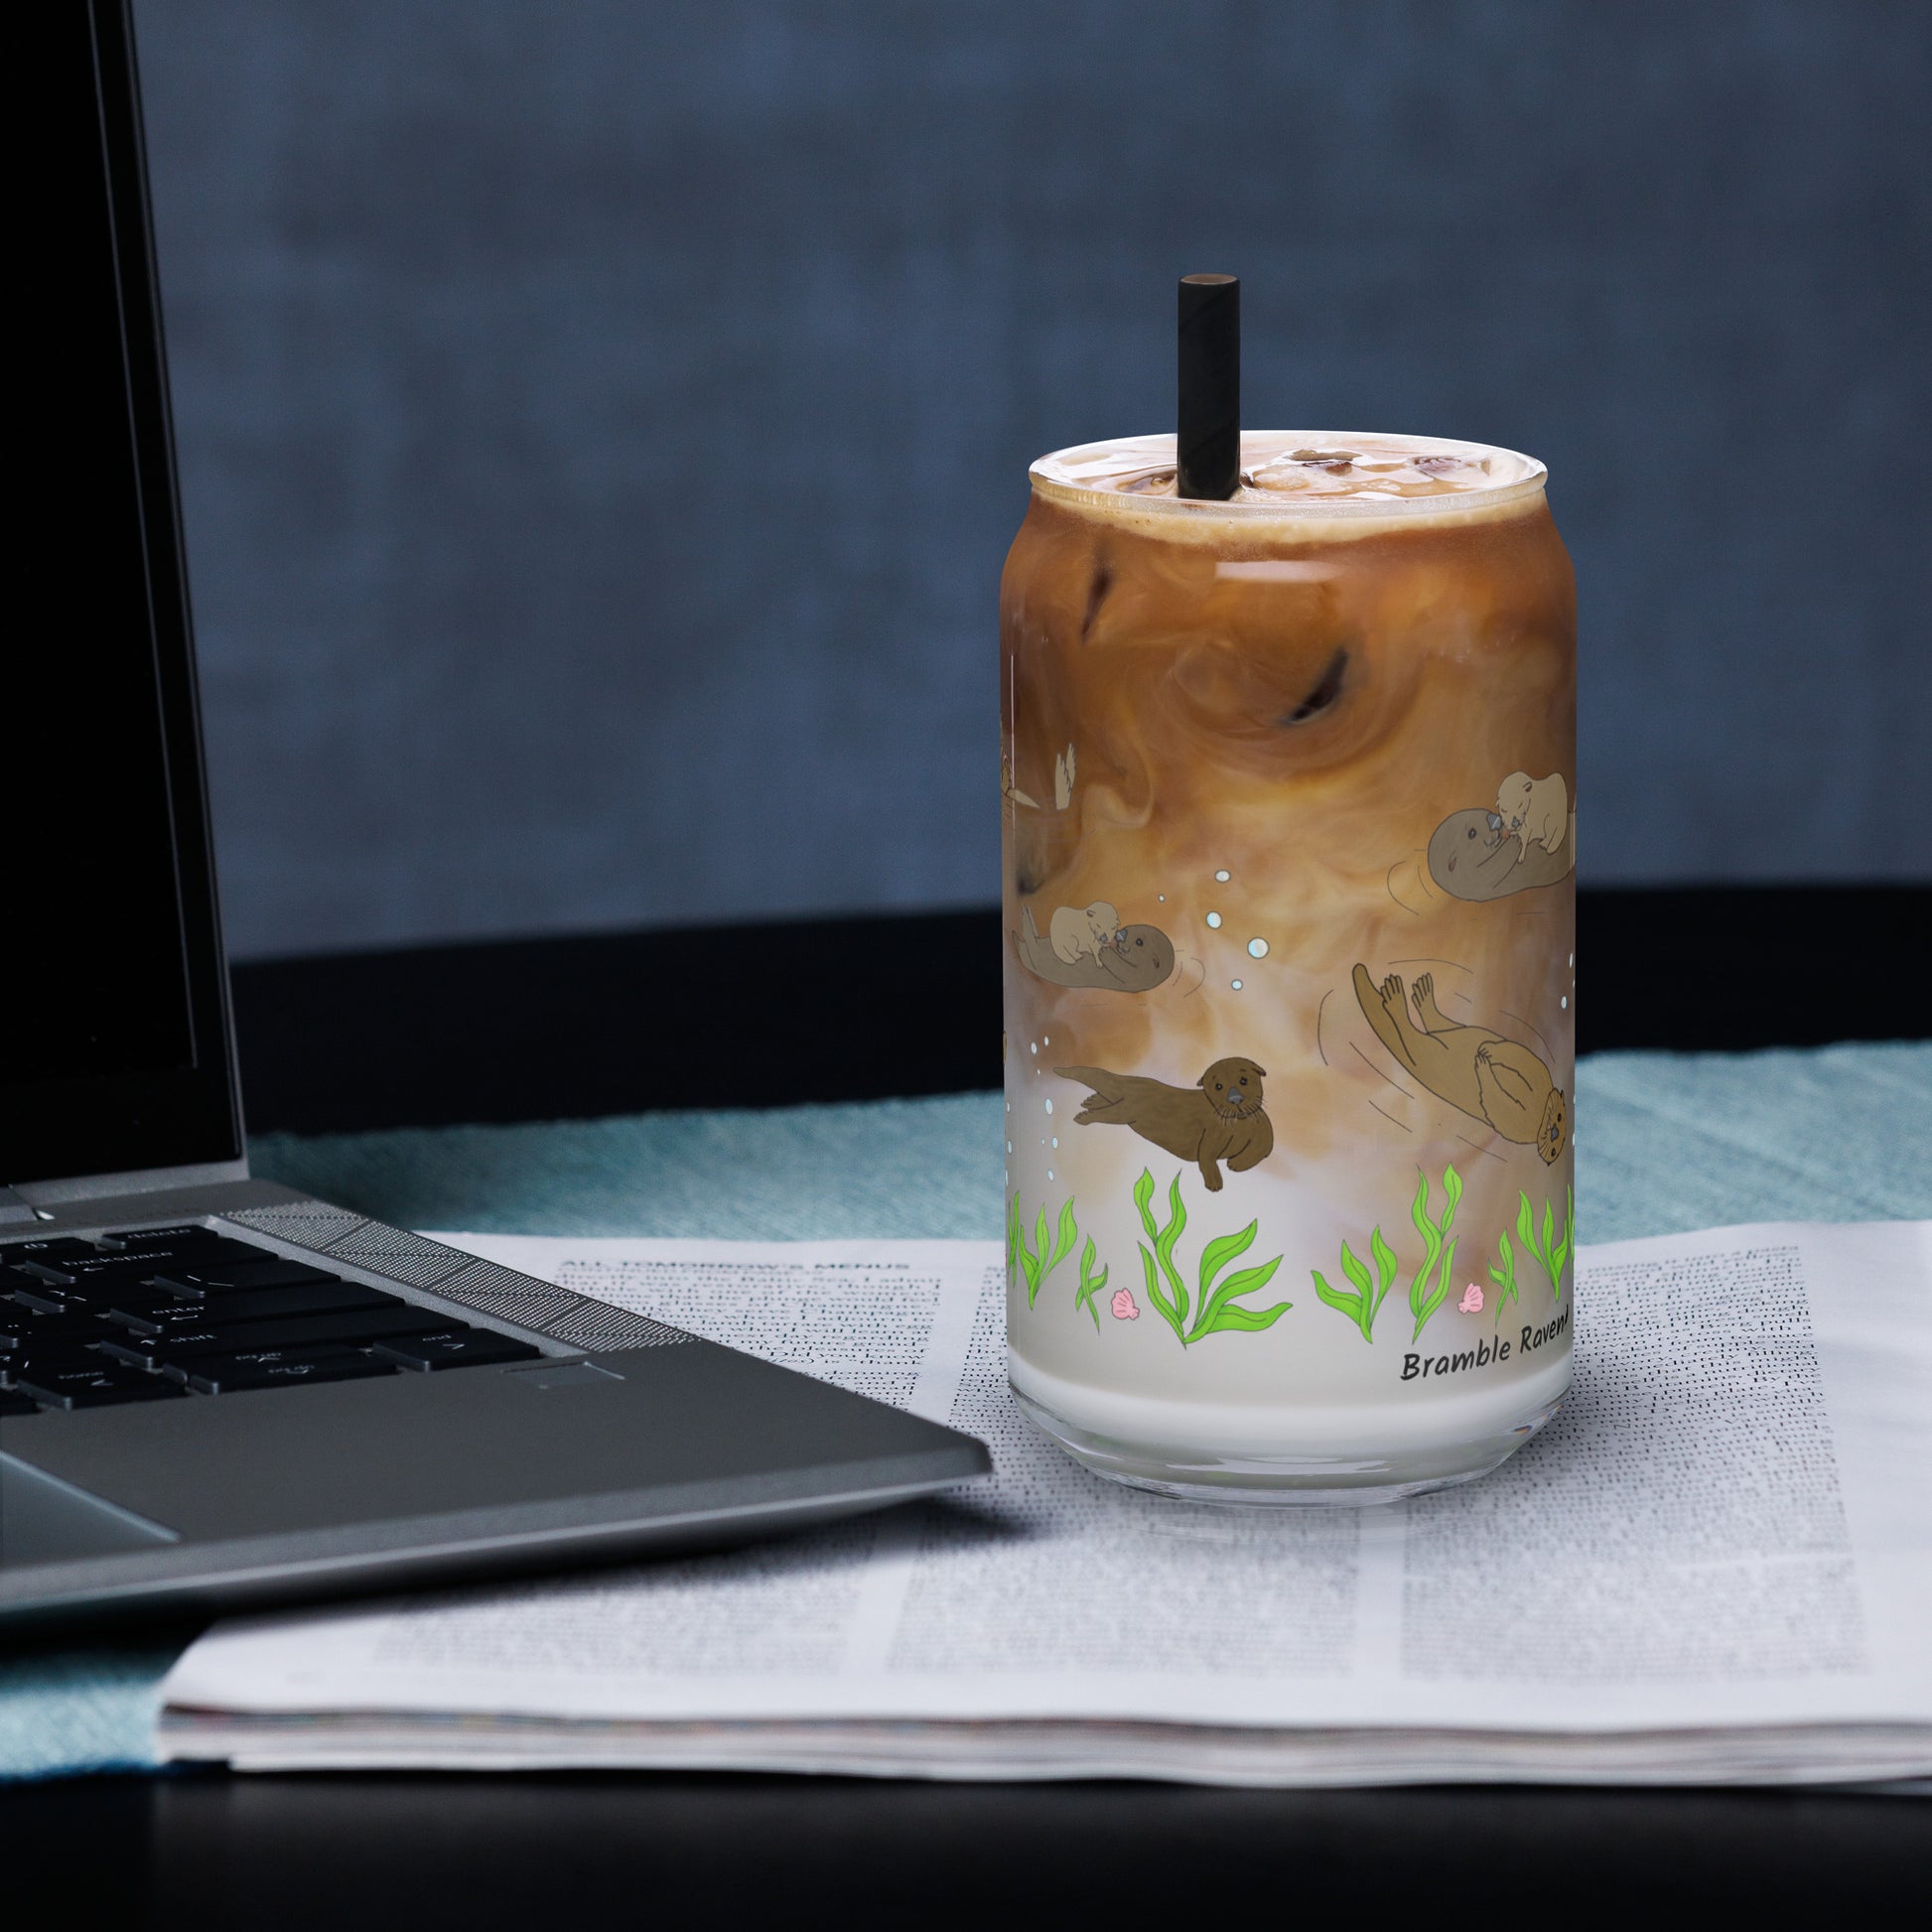 Can-shaped glass holds 16 fluid ounces. Has a design of sea otters swimming above the seaweed with bubble and shell accents. Filled with iced coffee and a straw, sitting by a laptop.